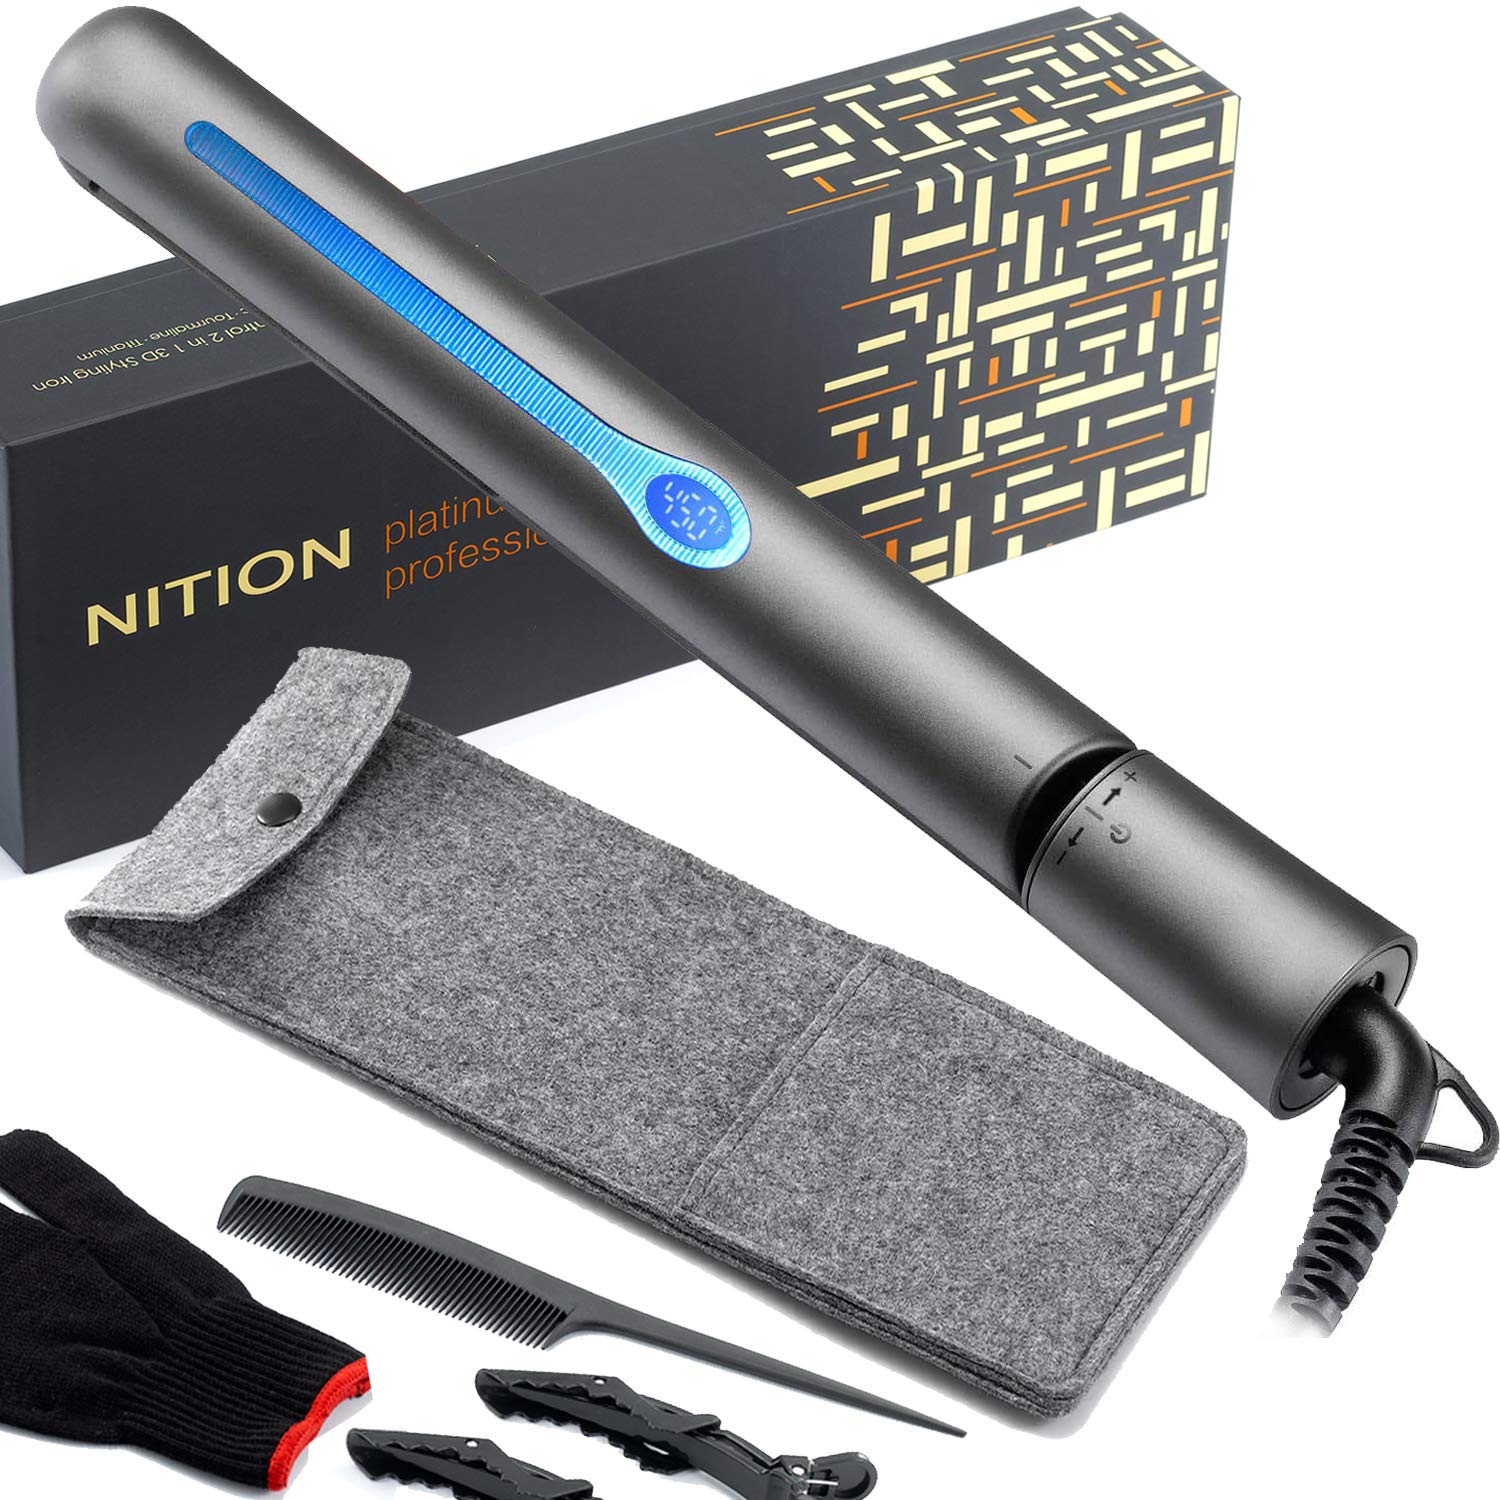 NITION Ceramic Tourmaline Flat Iron for Hair LCD Hair Straightener MCH Fast Straightening for Healthy Styling. 265-450°F Adjustable. 2-in-1 Curling Iron for All Hair Type,1 inch Heating Plate,Black